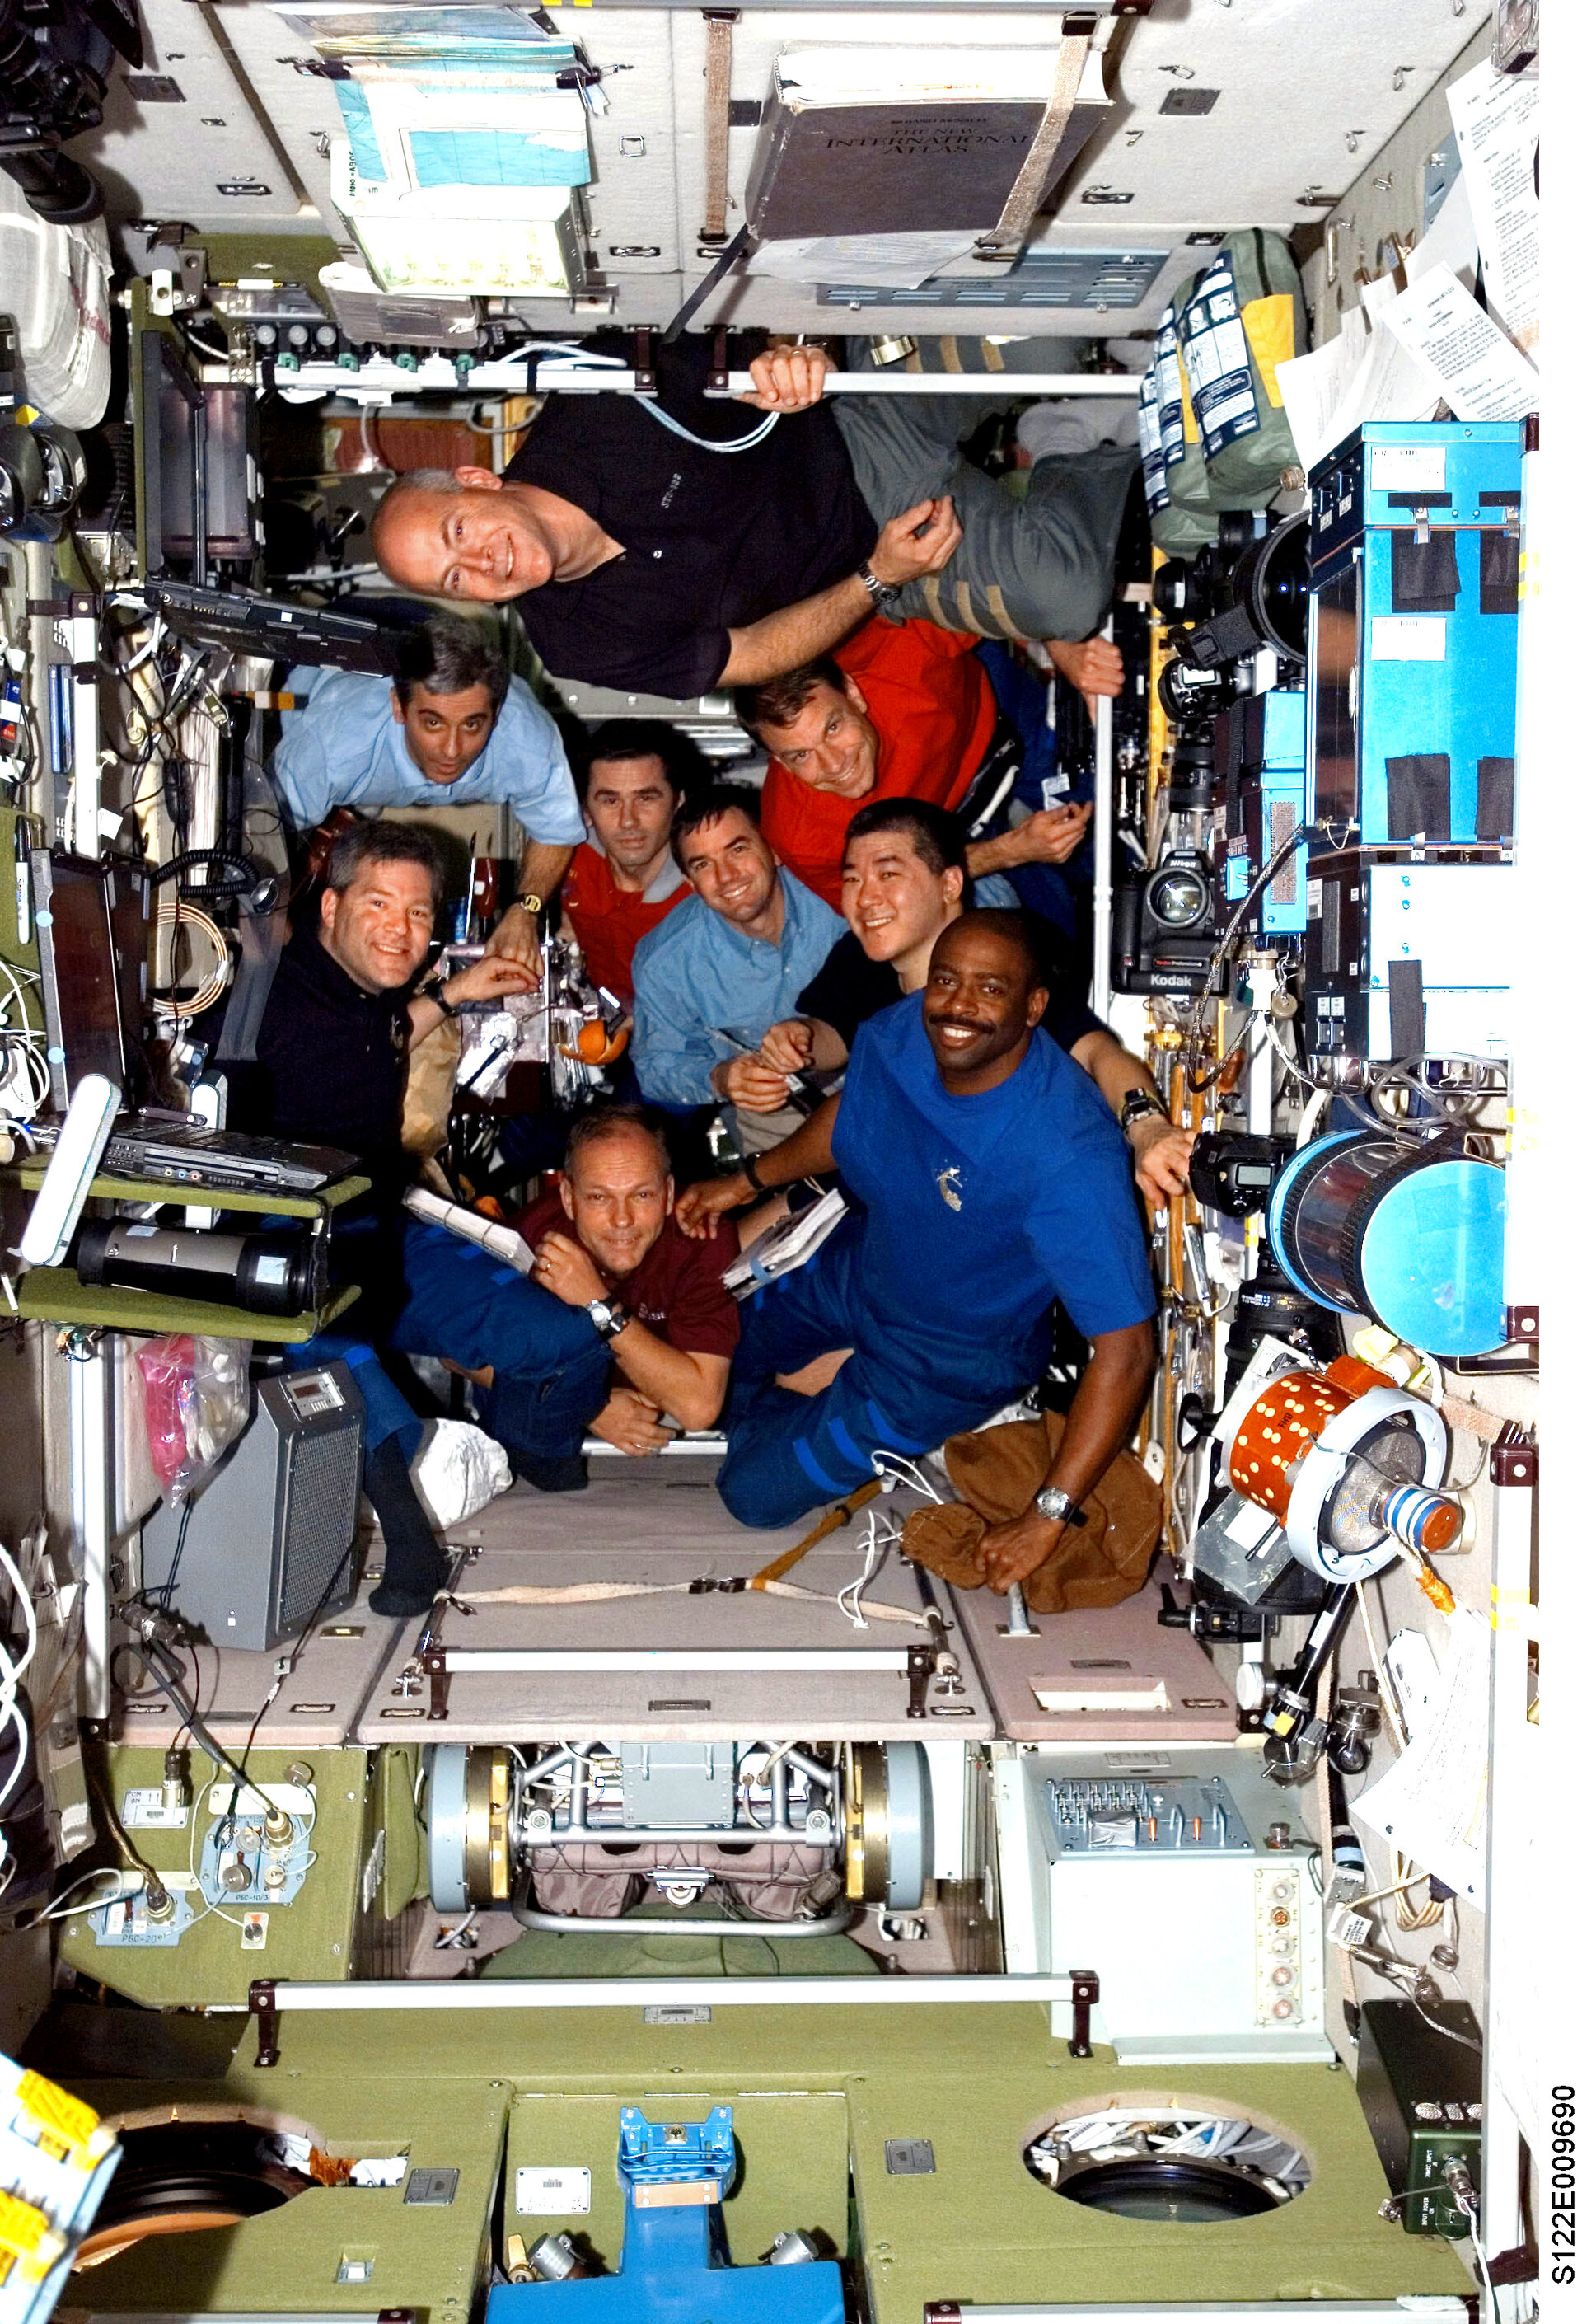 STS-122 and Expedition 16 crews inside the ISS